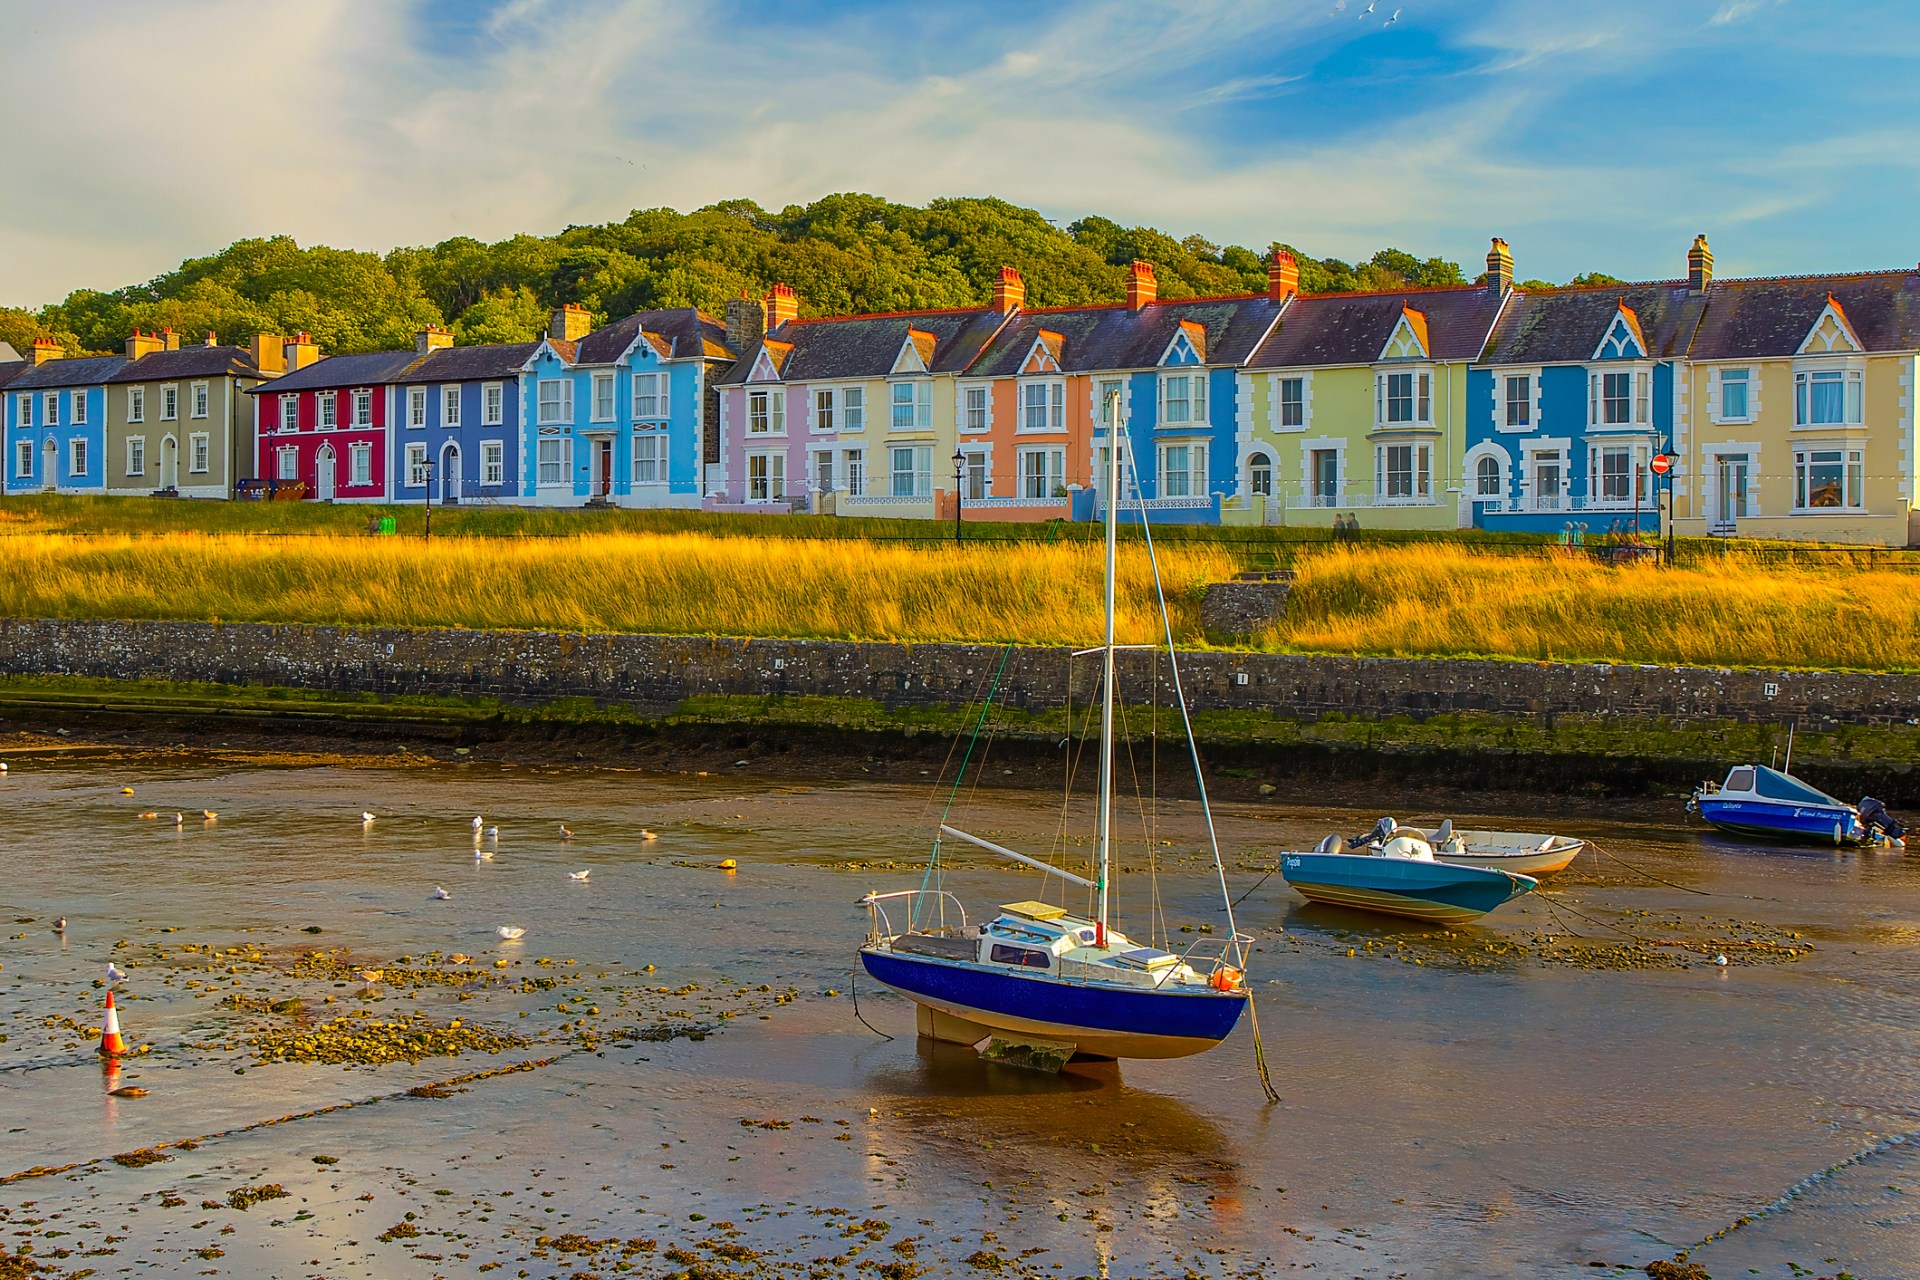 colourful seaside town is one of 'least visited' in uk with few train travellers